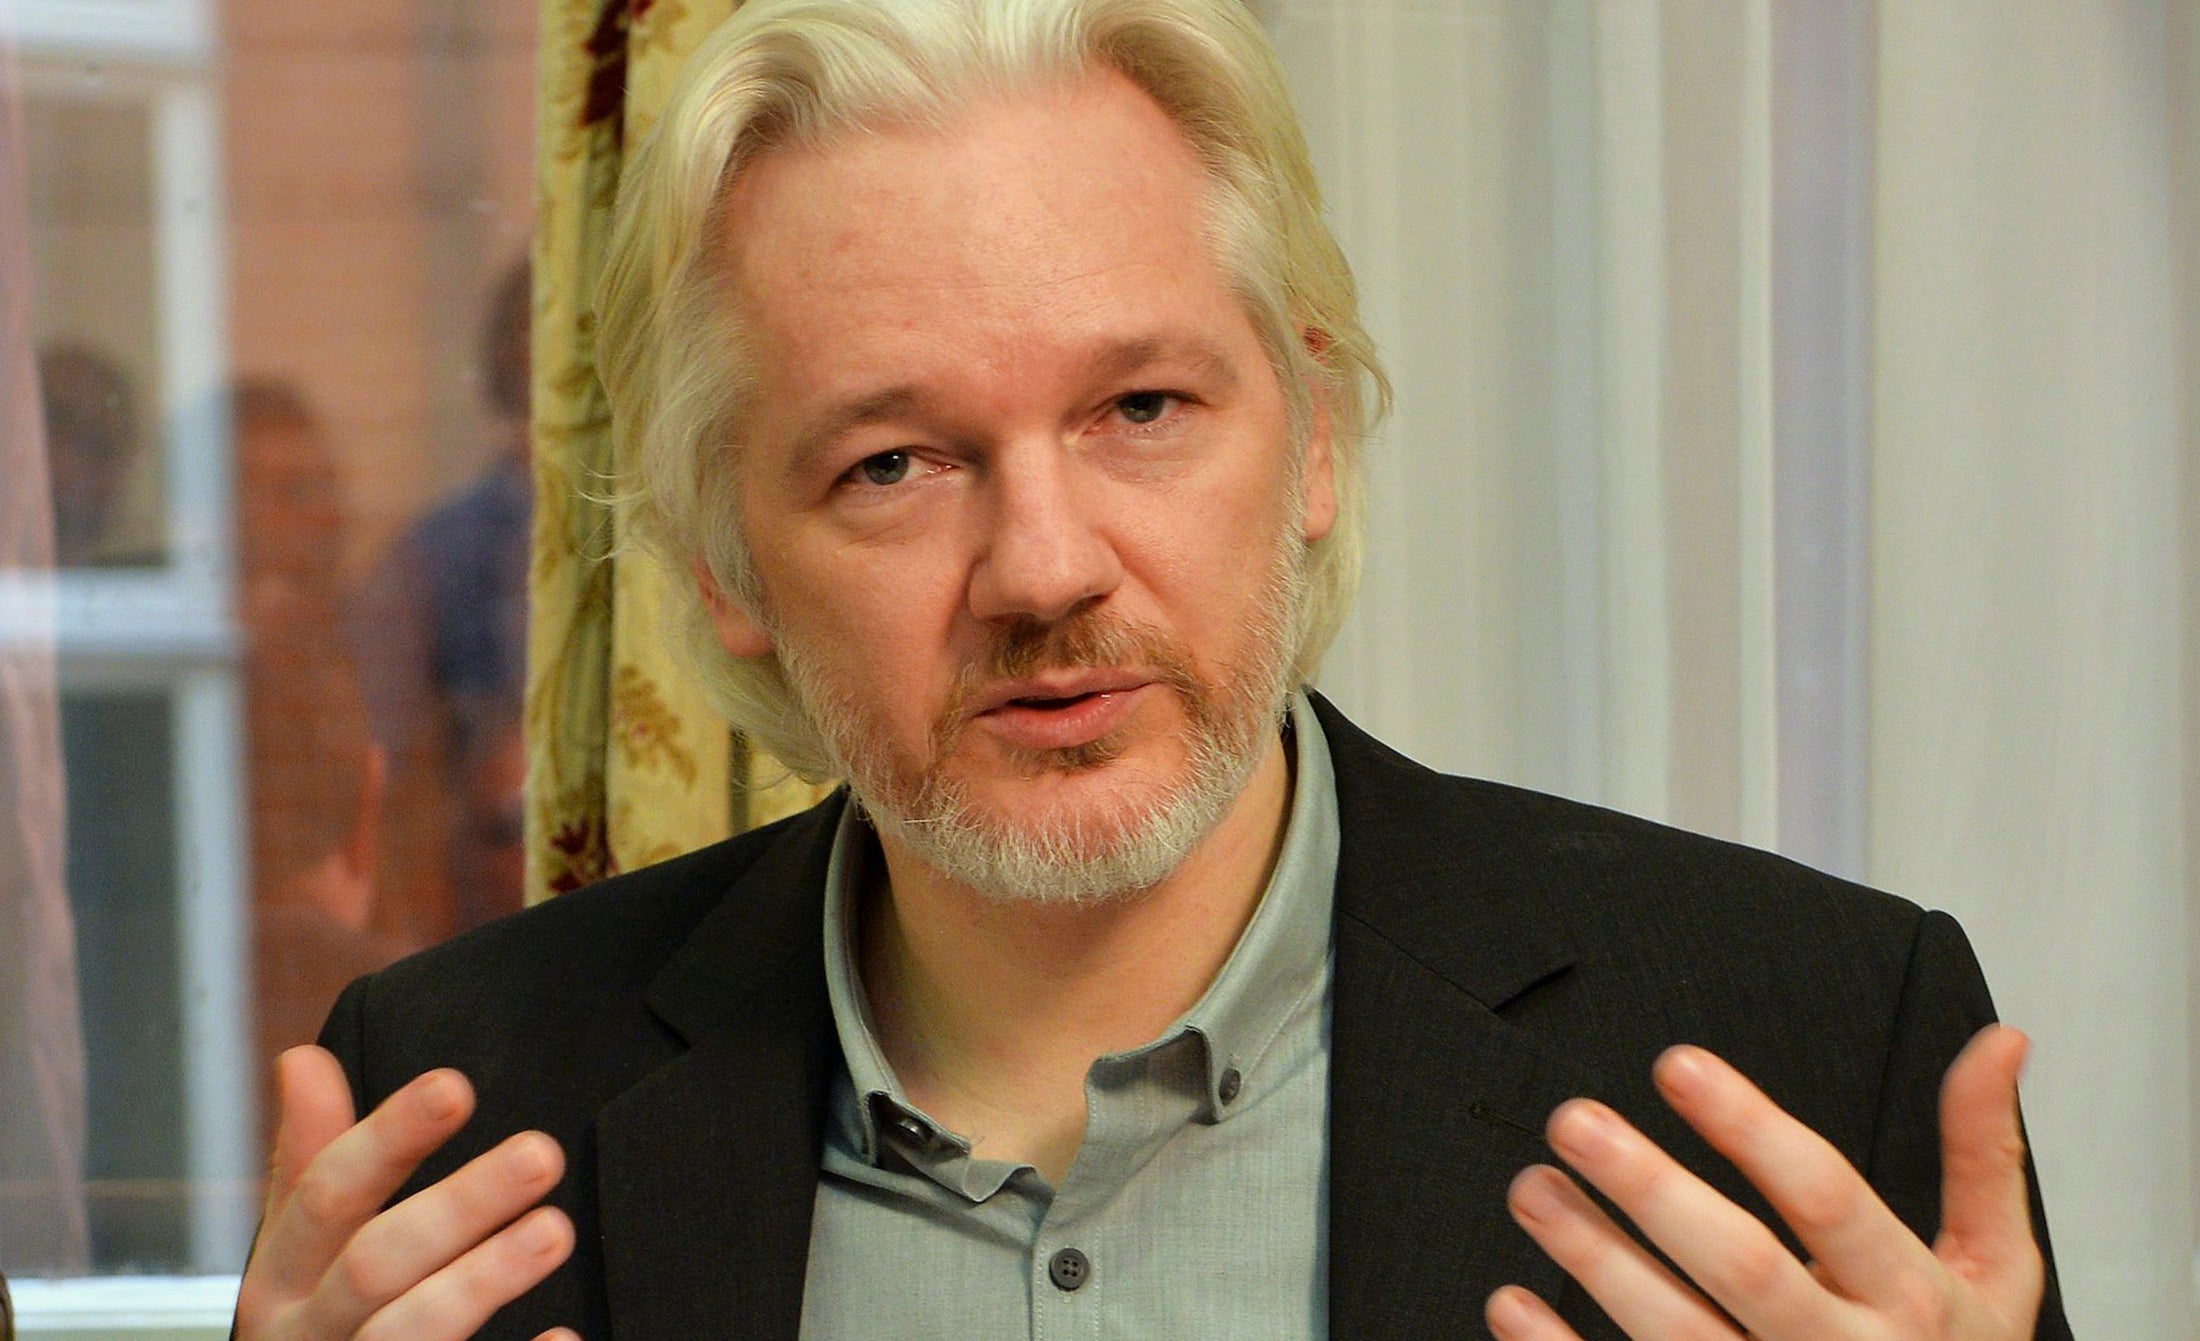 Julian Assange giving a press conference at the Ecuadorian embassy in London, which he said he is leaving "soon"